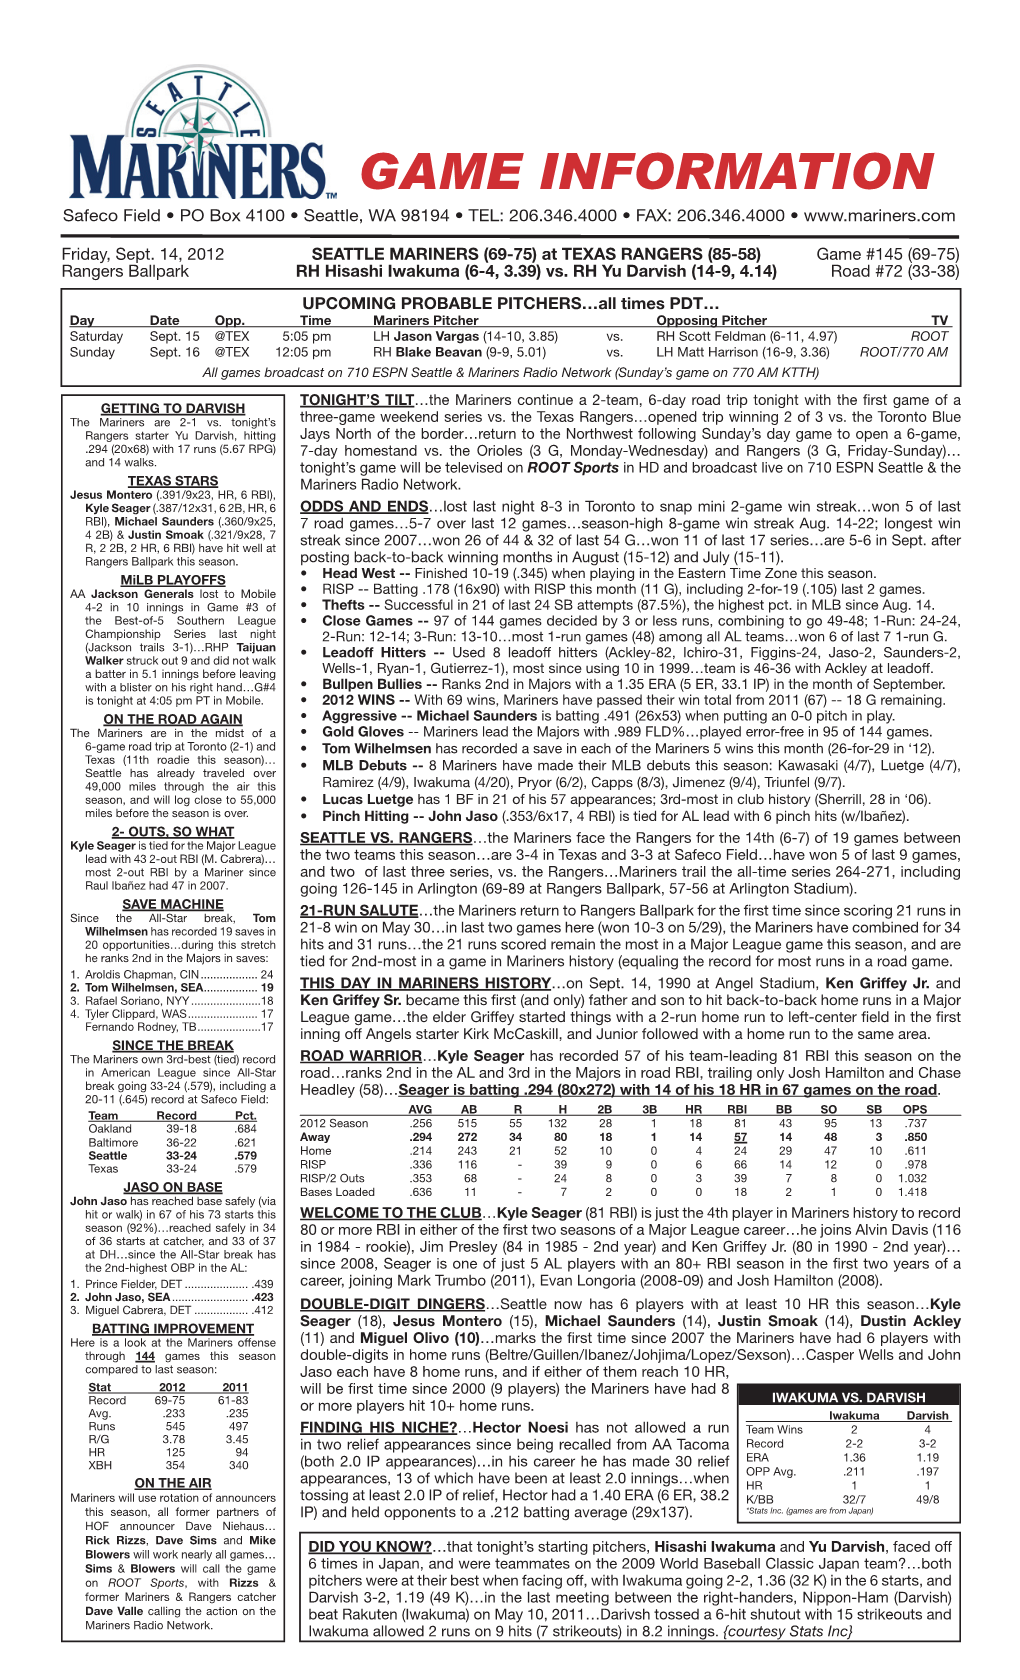 Mariners Game Notes • FRIDAY • SEPTEMBER 14, 2012 • at TEXAS RANGERS • Page 2